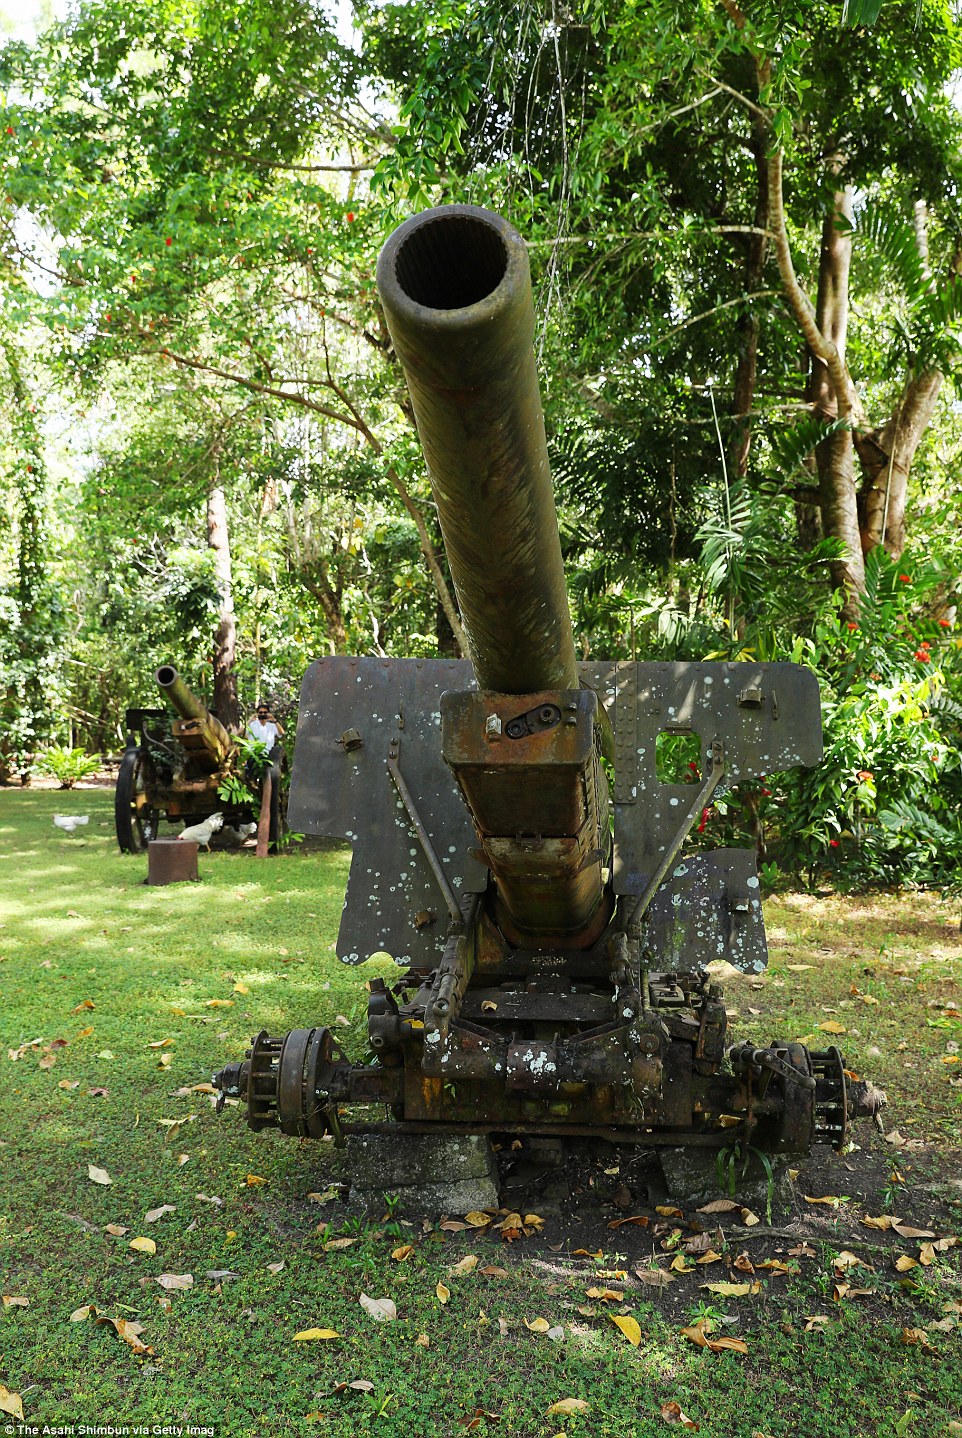 3B1221C500000578-4003520-A Type 96 15 cm howitzer used by Imperial Japan Army in Guadalca-a-15 1480994575442